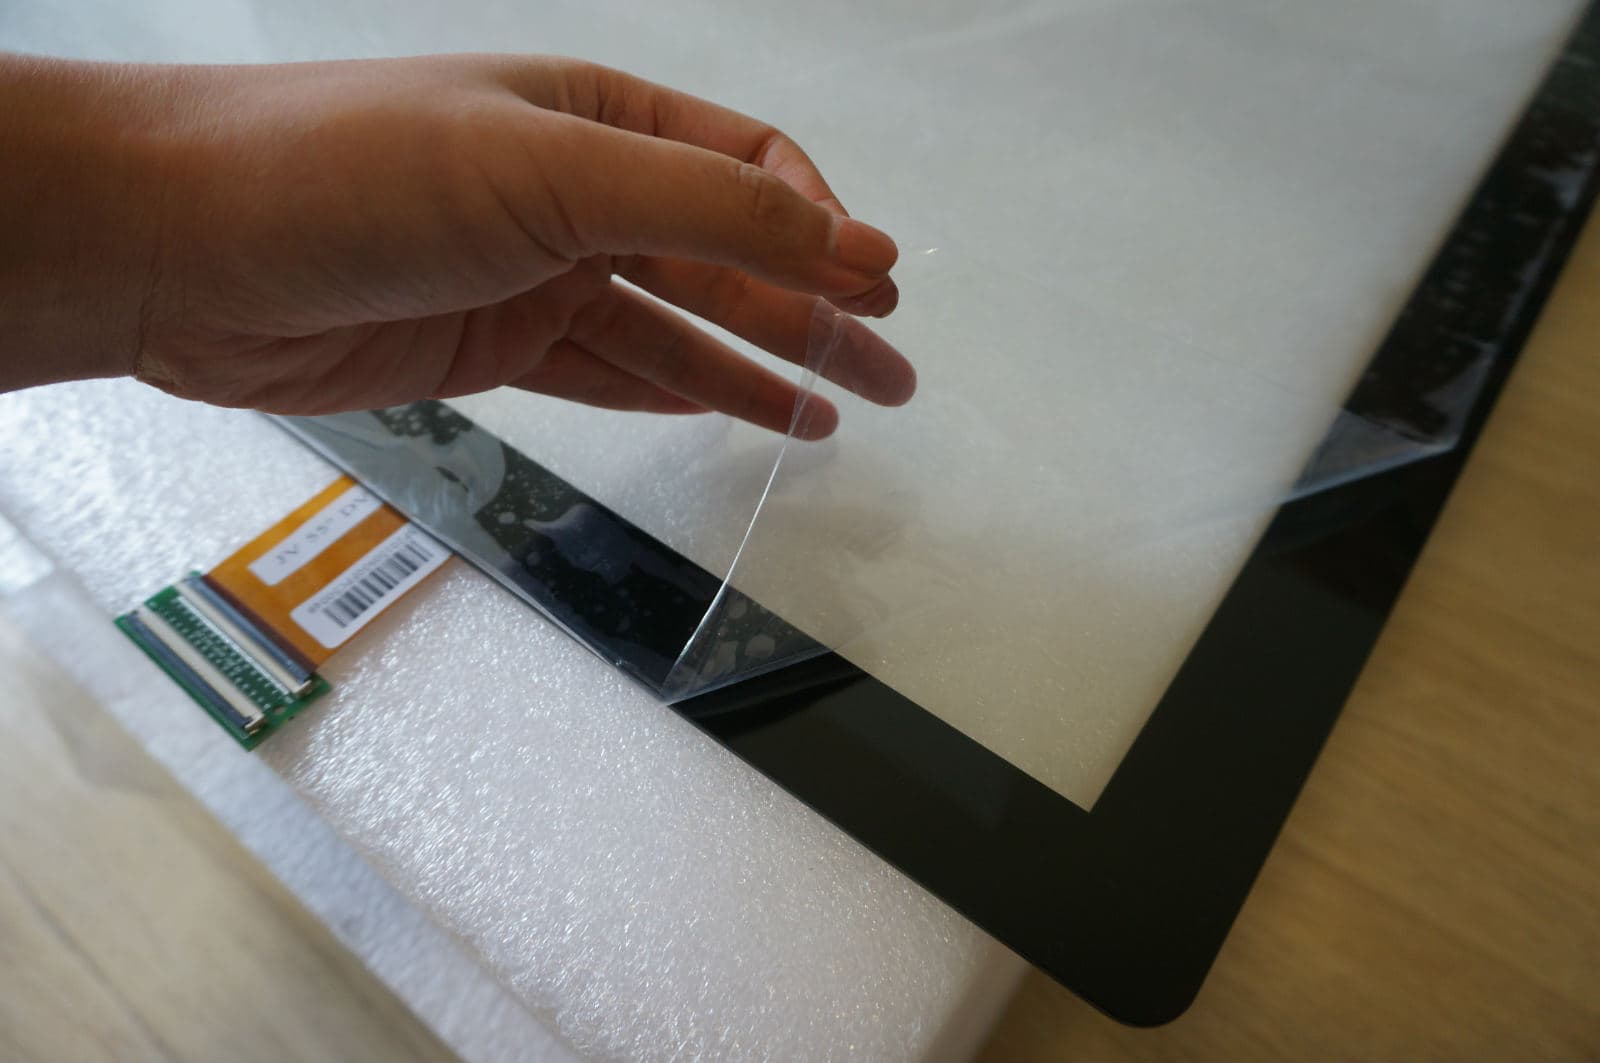 Large format projected capacitive touch screens